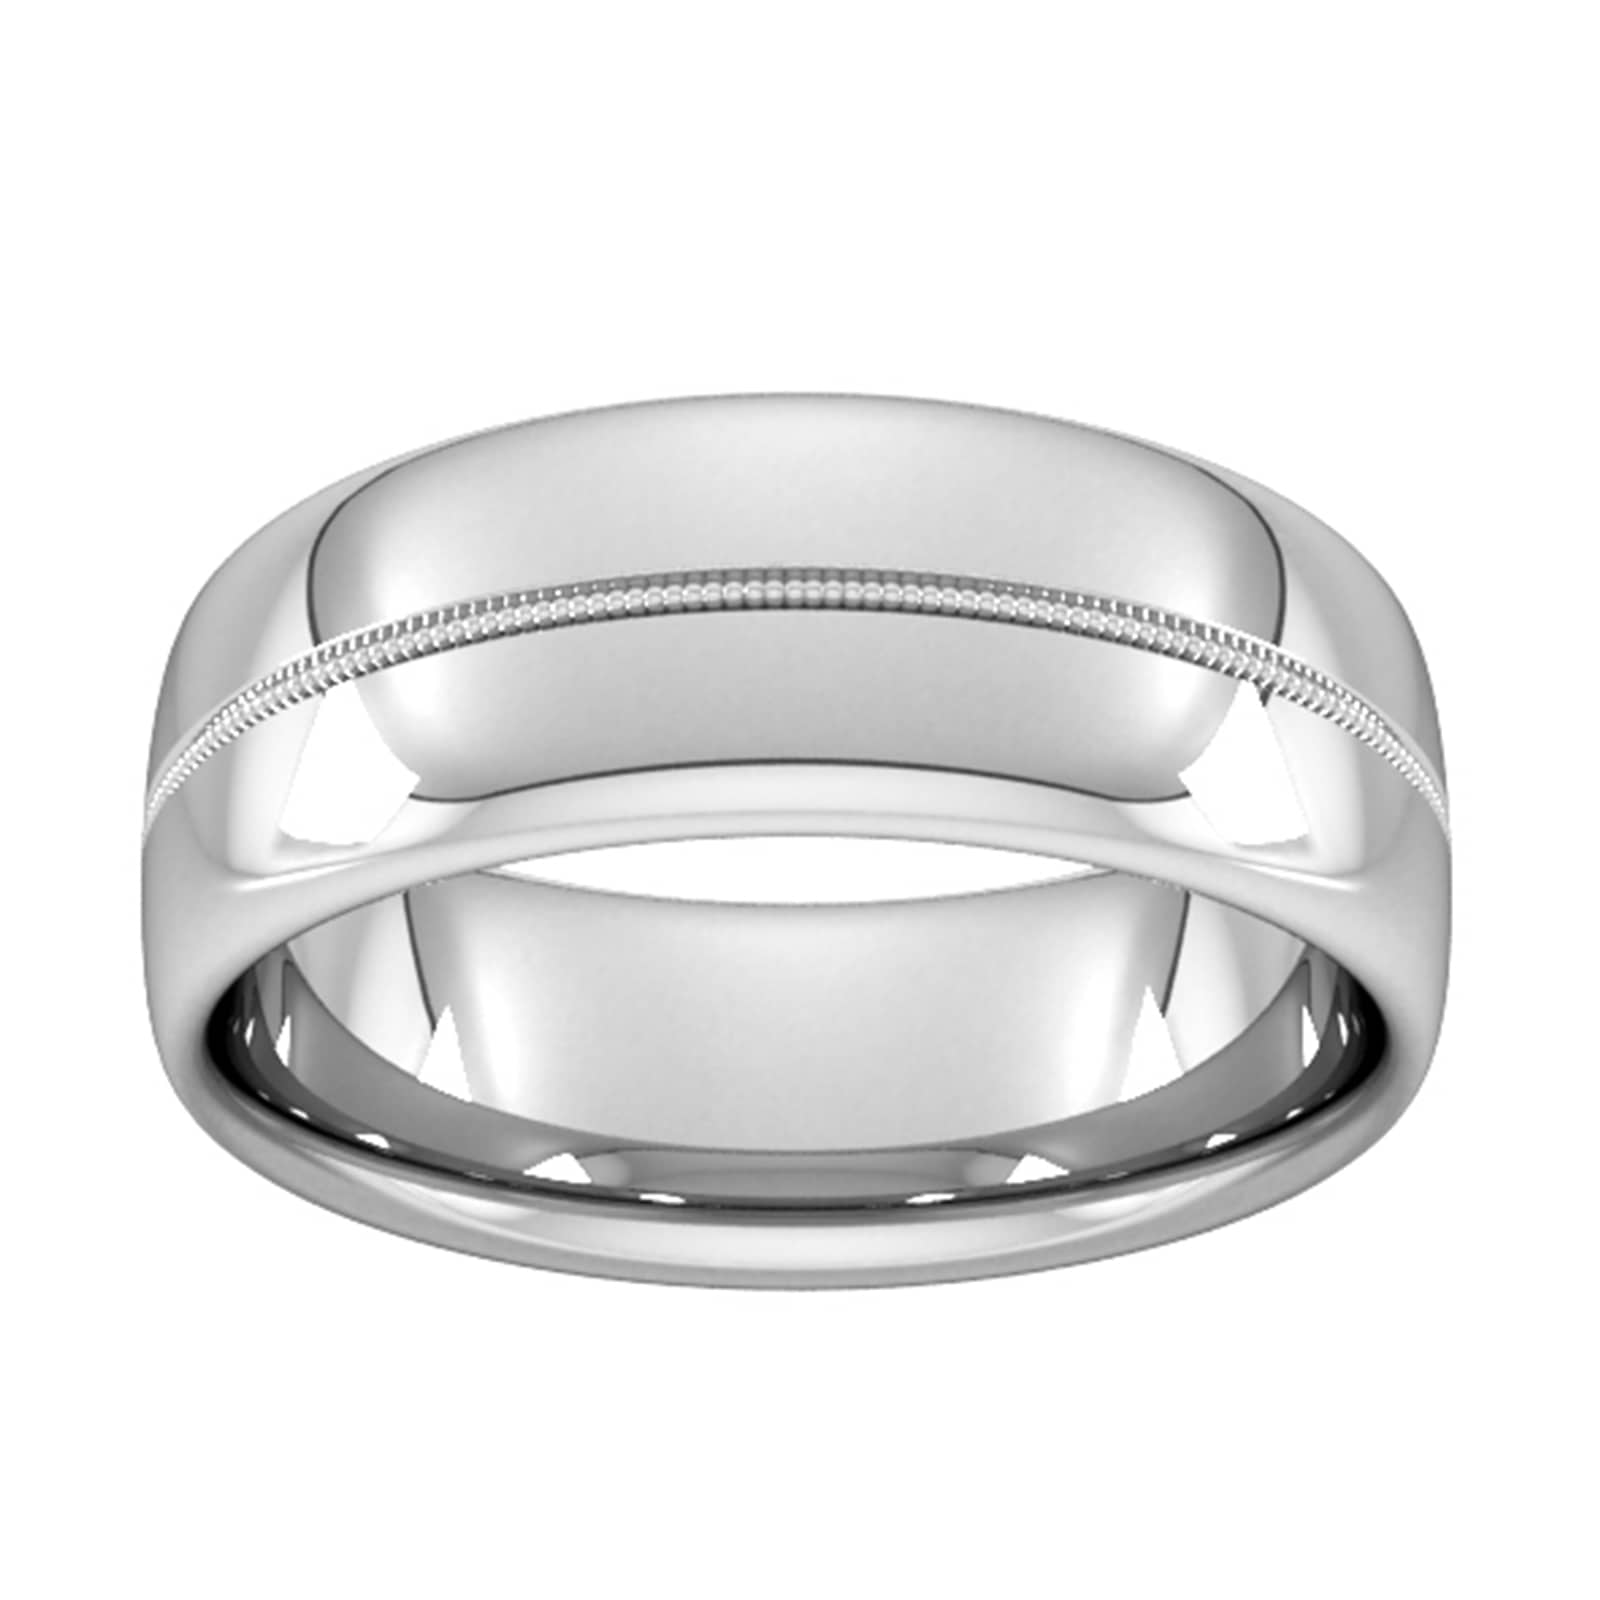 8mm Traditional Court Standard Milgrain Centre Wedding Ring In 9 Carat White Gold - Ring Size M